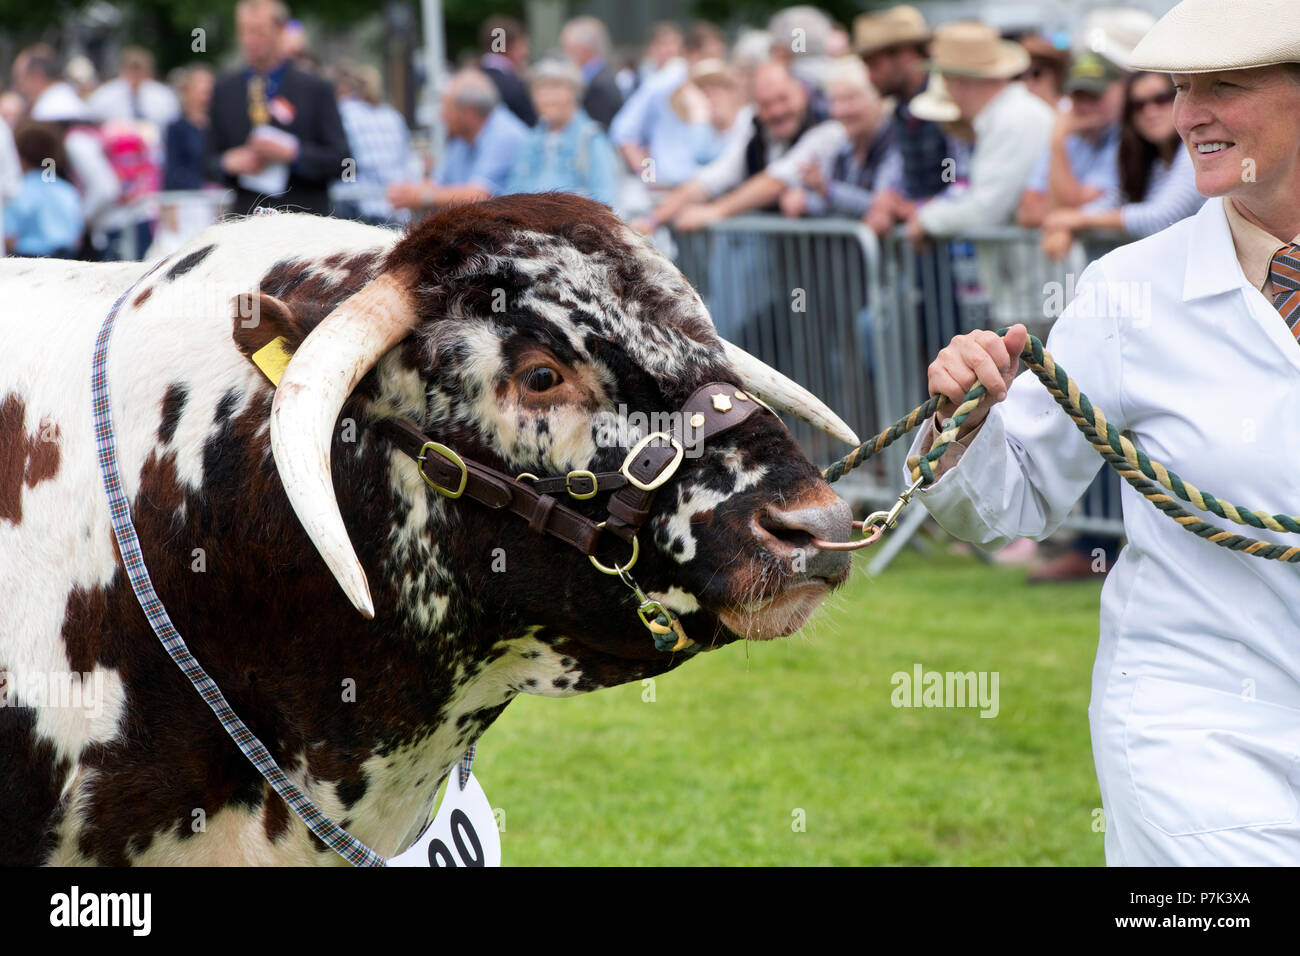 Bos primigenius. English Longhorn bull at an Agricultural show. UK Stock Photo